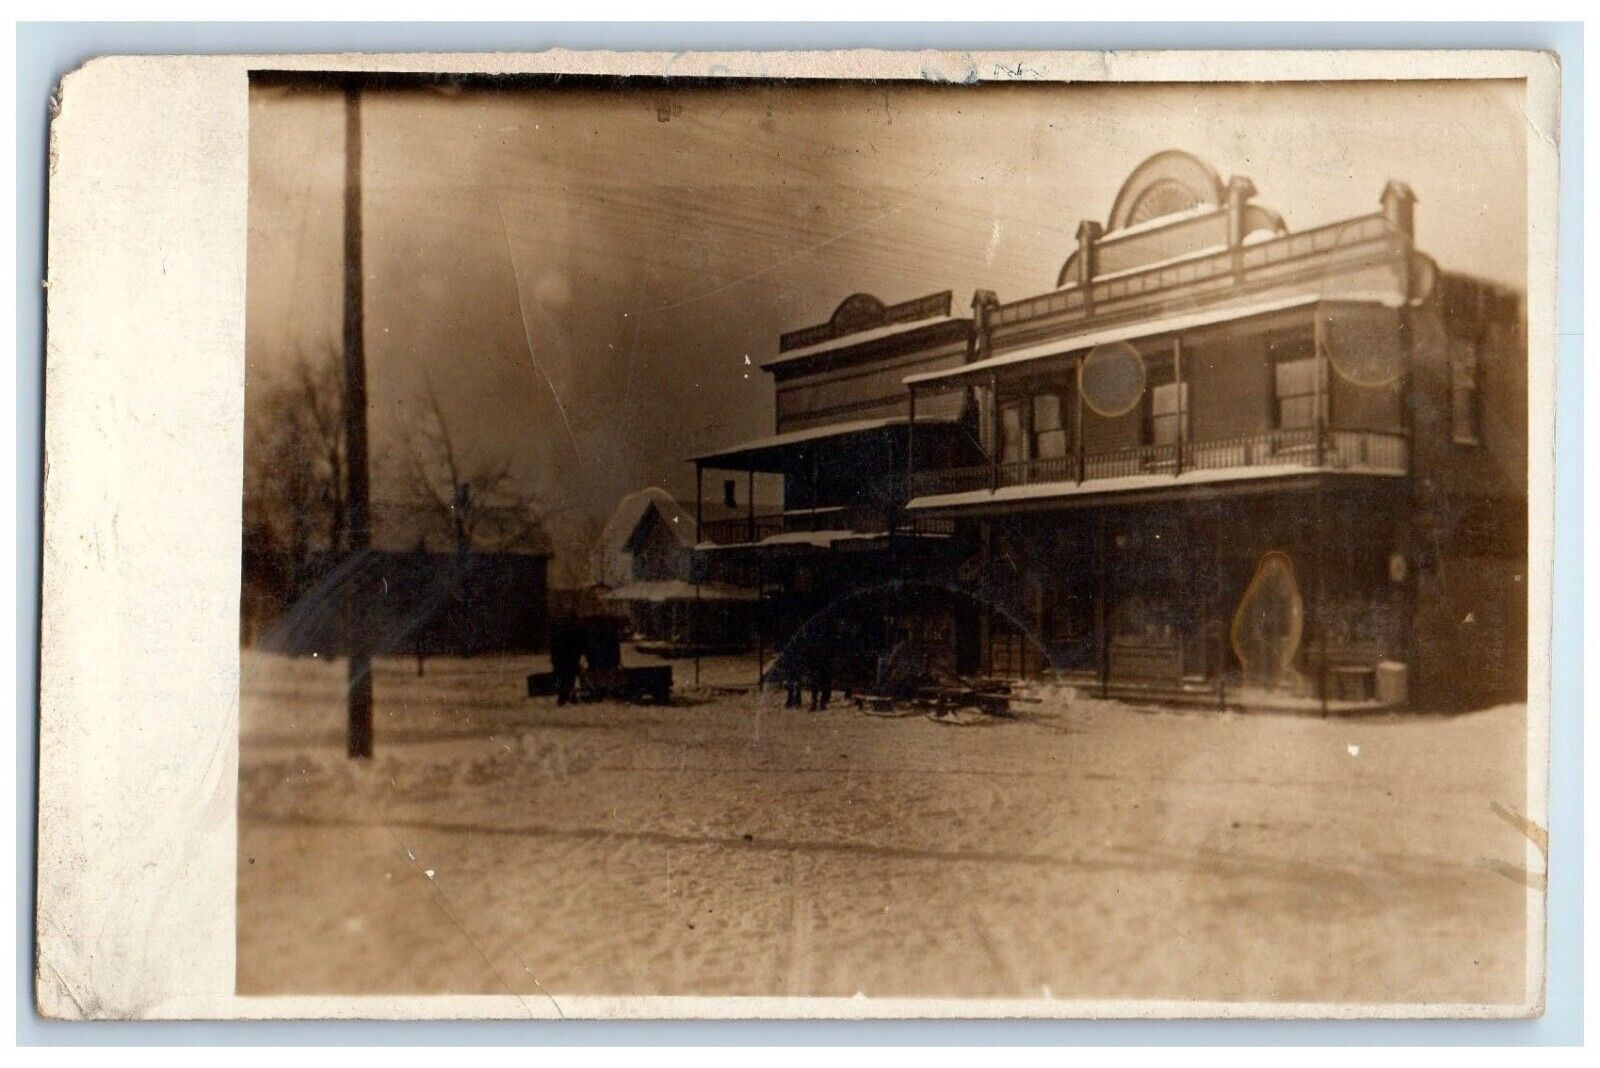 1914 General Store Chaffee New York NY RPPC Photo Posted Antique Postcard